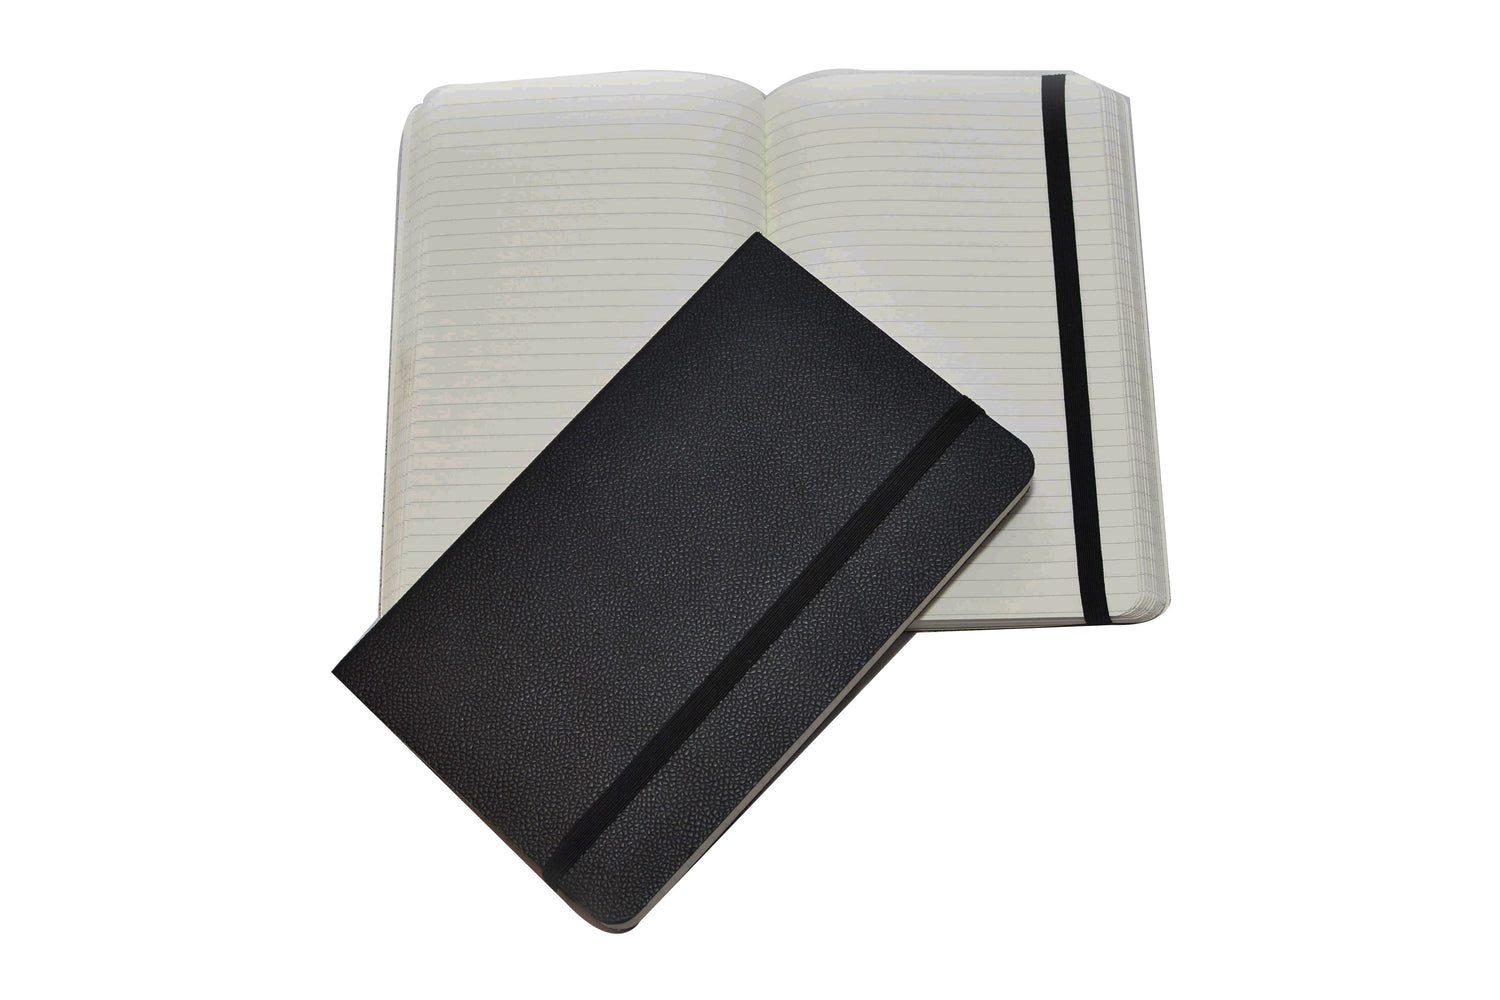 Leather Notebook by  Adelphi.